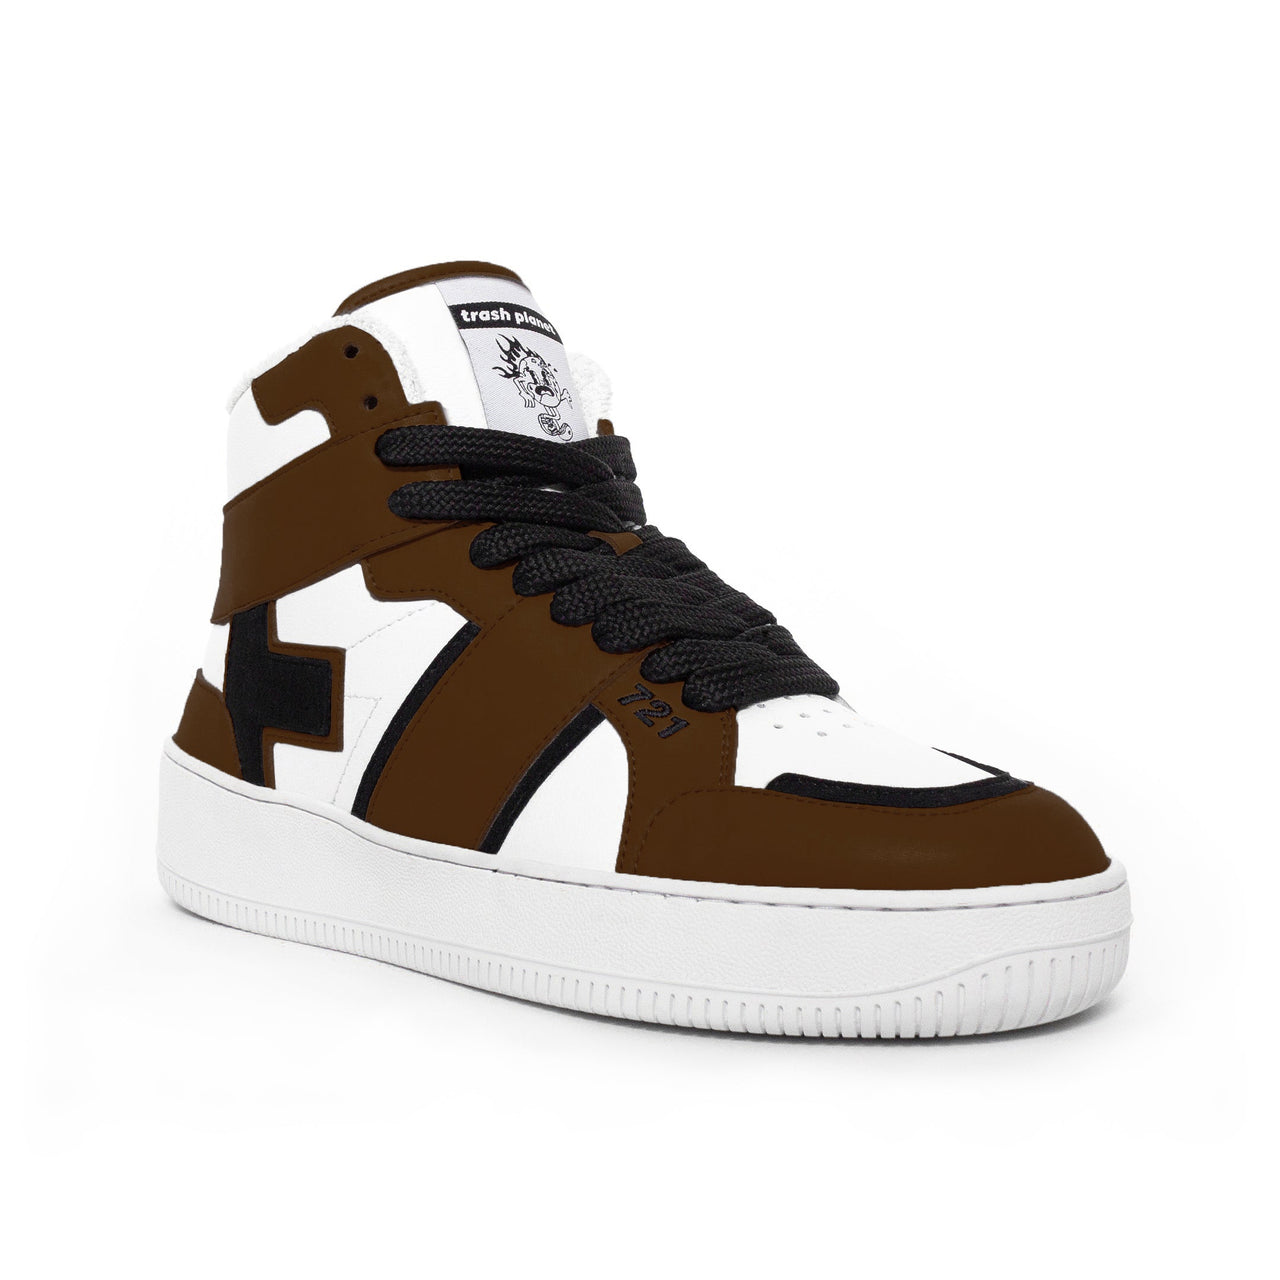 Side view of a recycled vegan corn leather Brown High Top sneaker with black and white details by Trash Planet